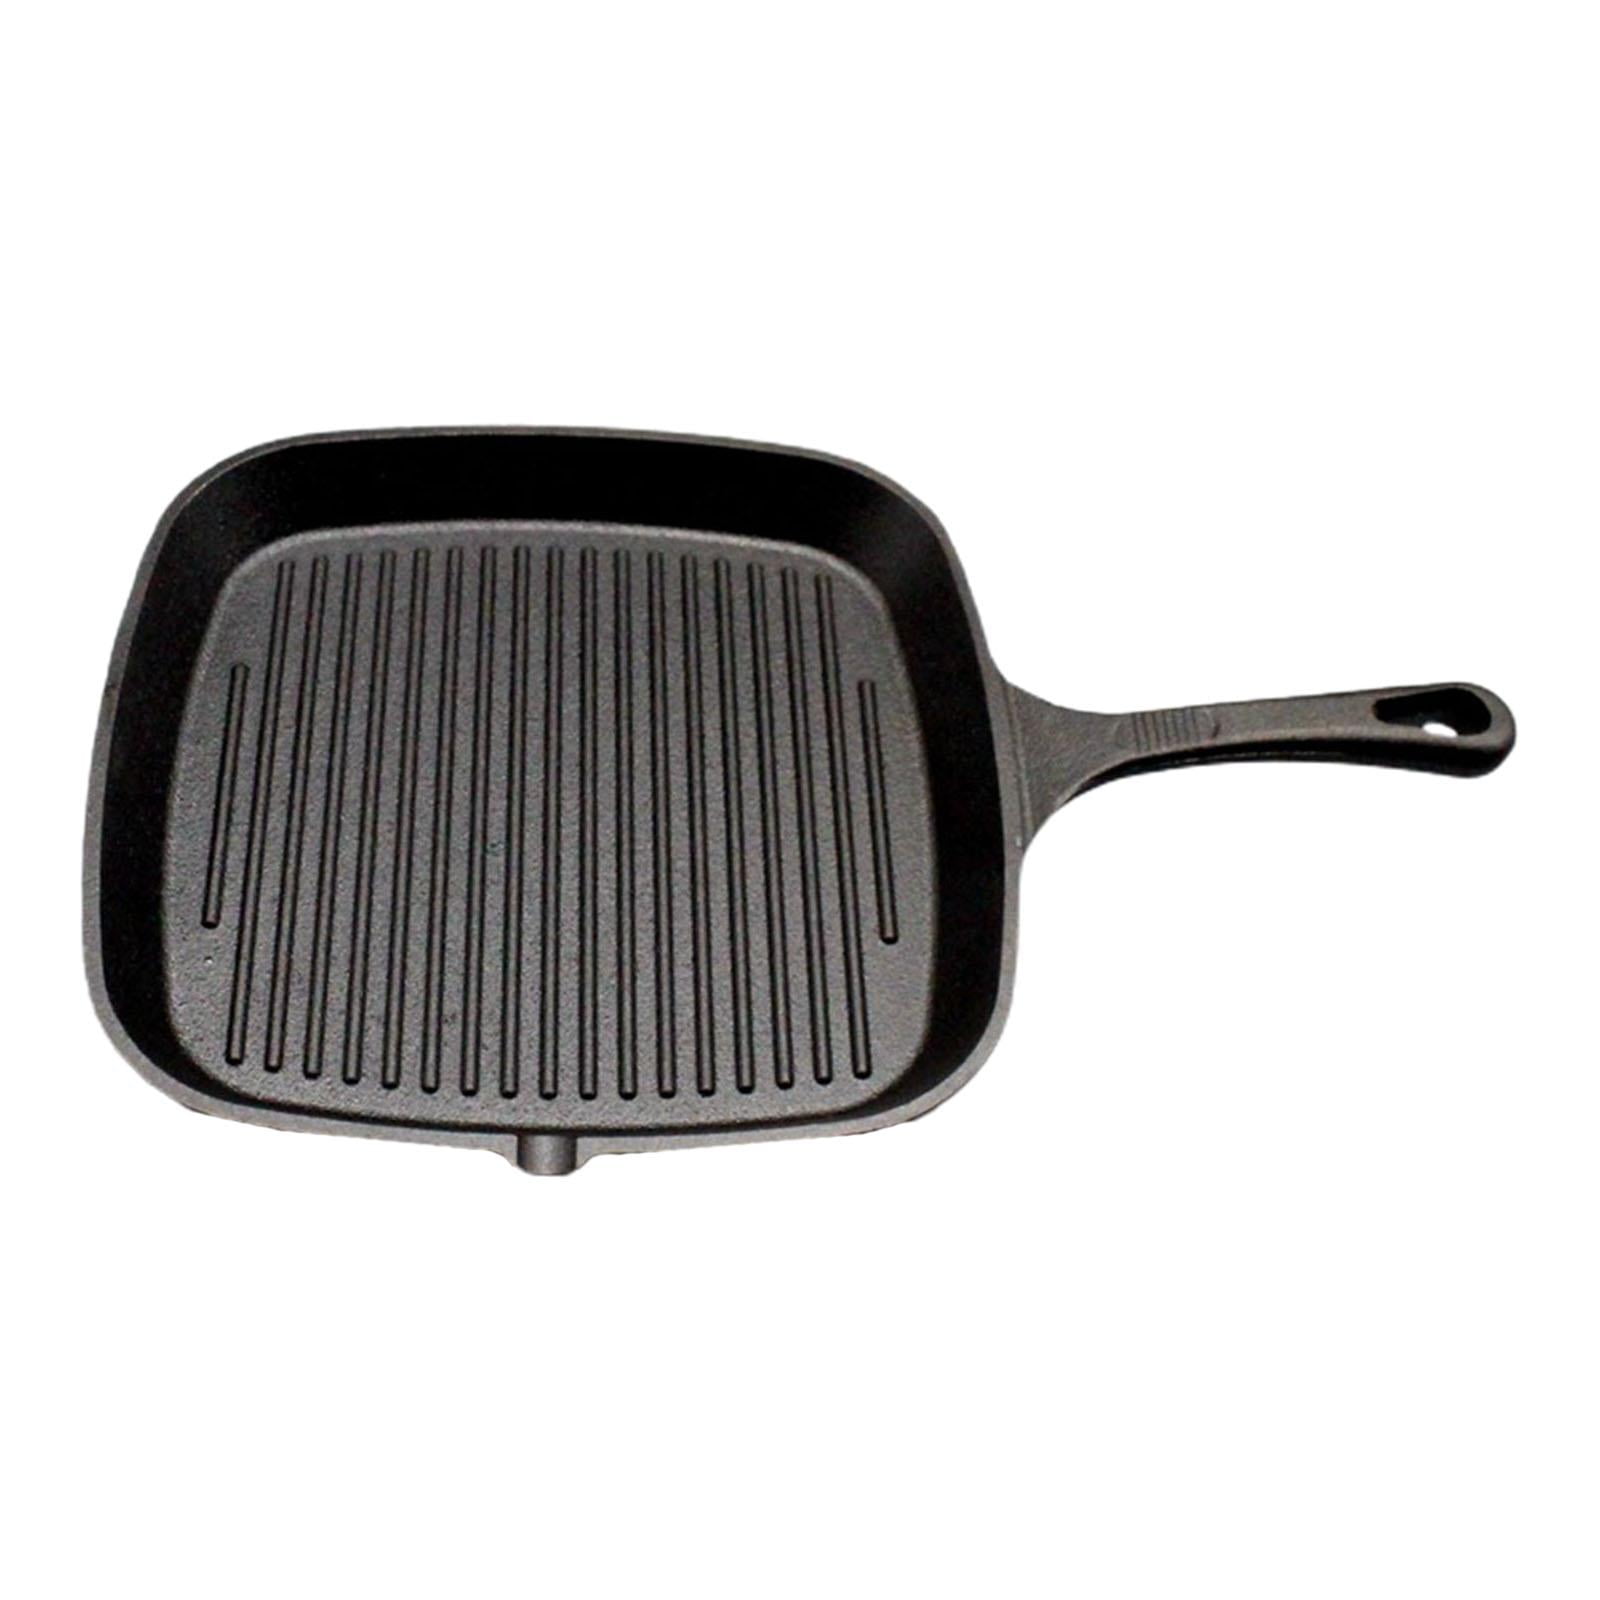 29/33cm Round Cast Iron Uncoated Frying Pan Outdoor Pancake Griddle  Nonstick Barbecue Gril Cooking Pot Kitchen Cookware Utensils